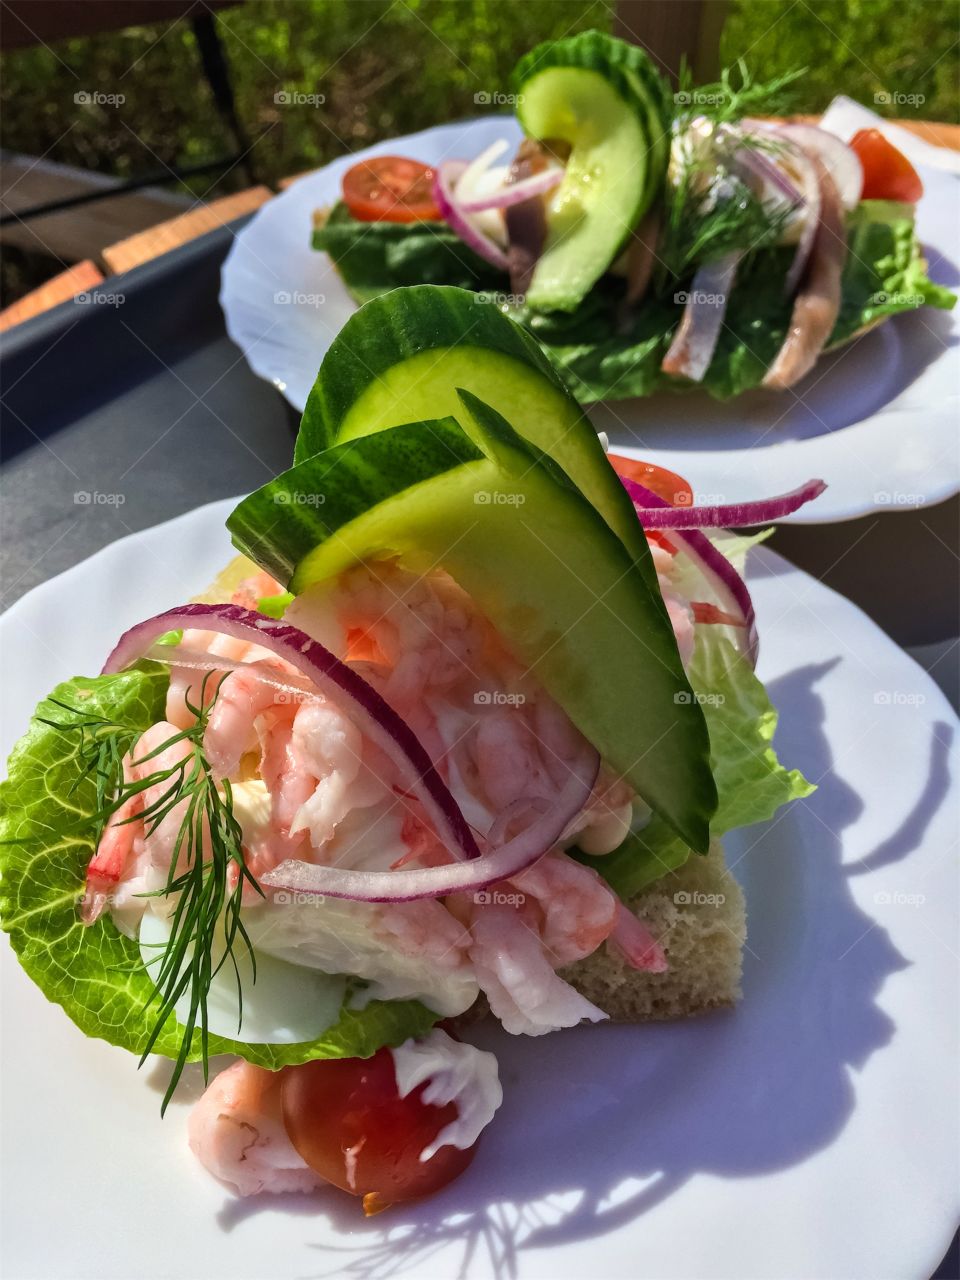 Sandwich with peeled shrimps and vegetables in foreground on white plate outdoors in garden cafe.